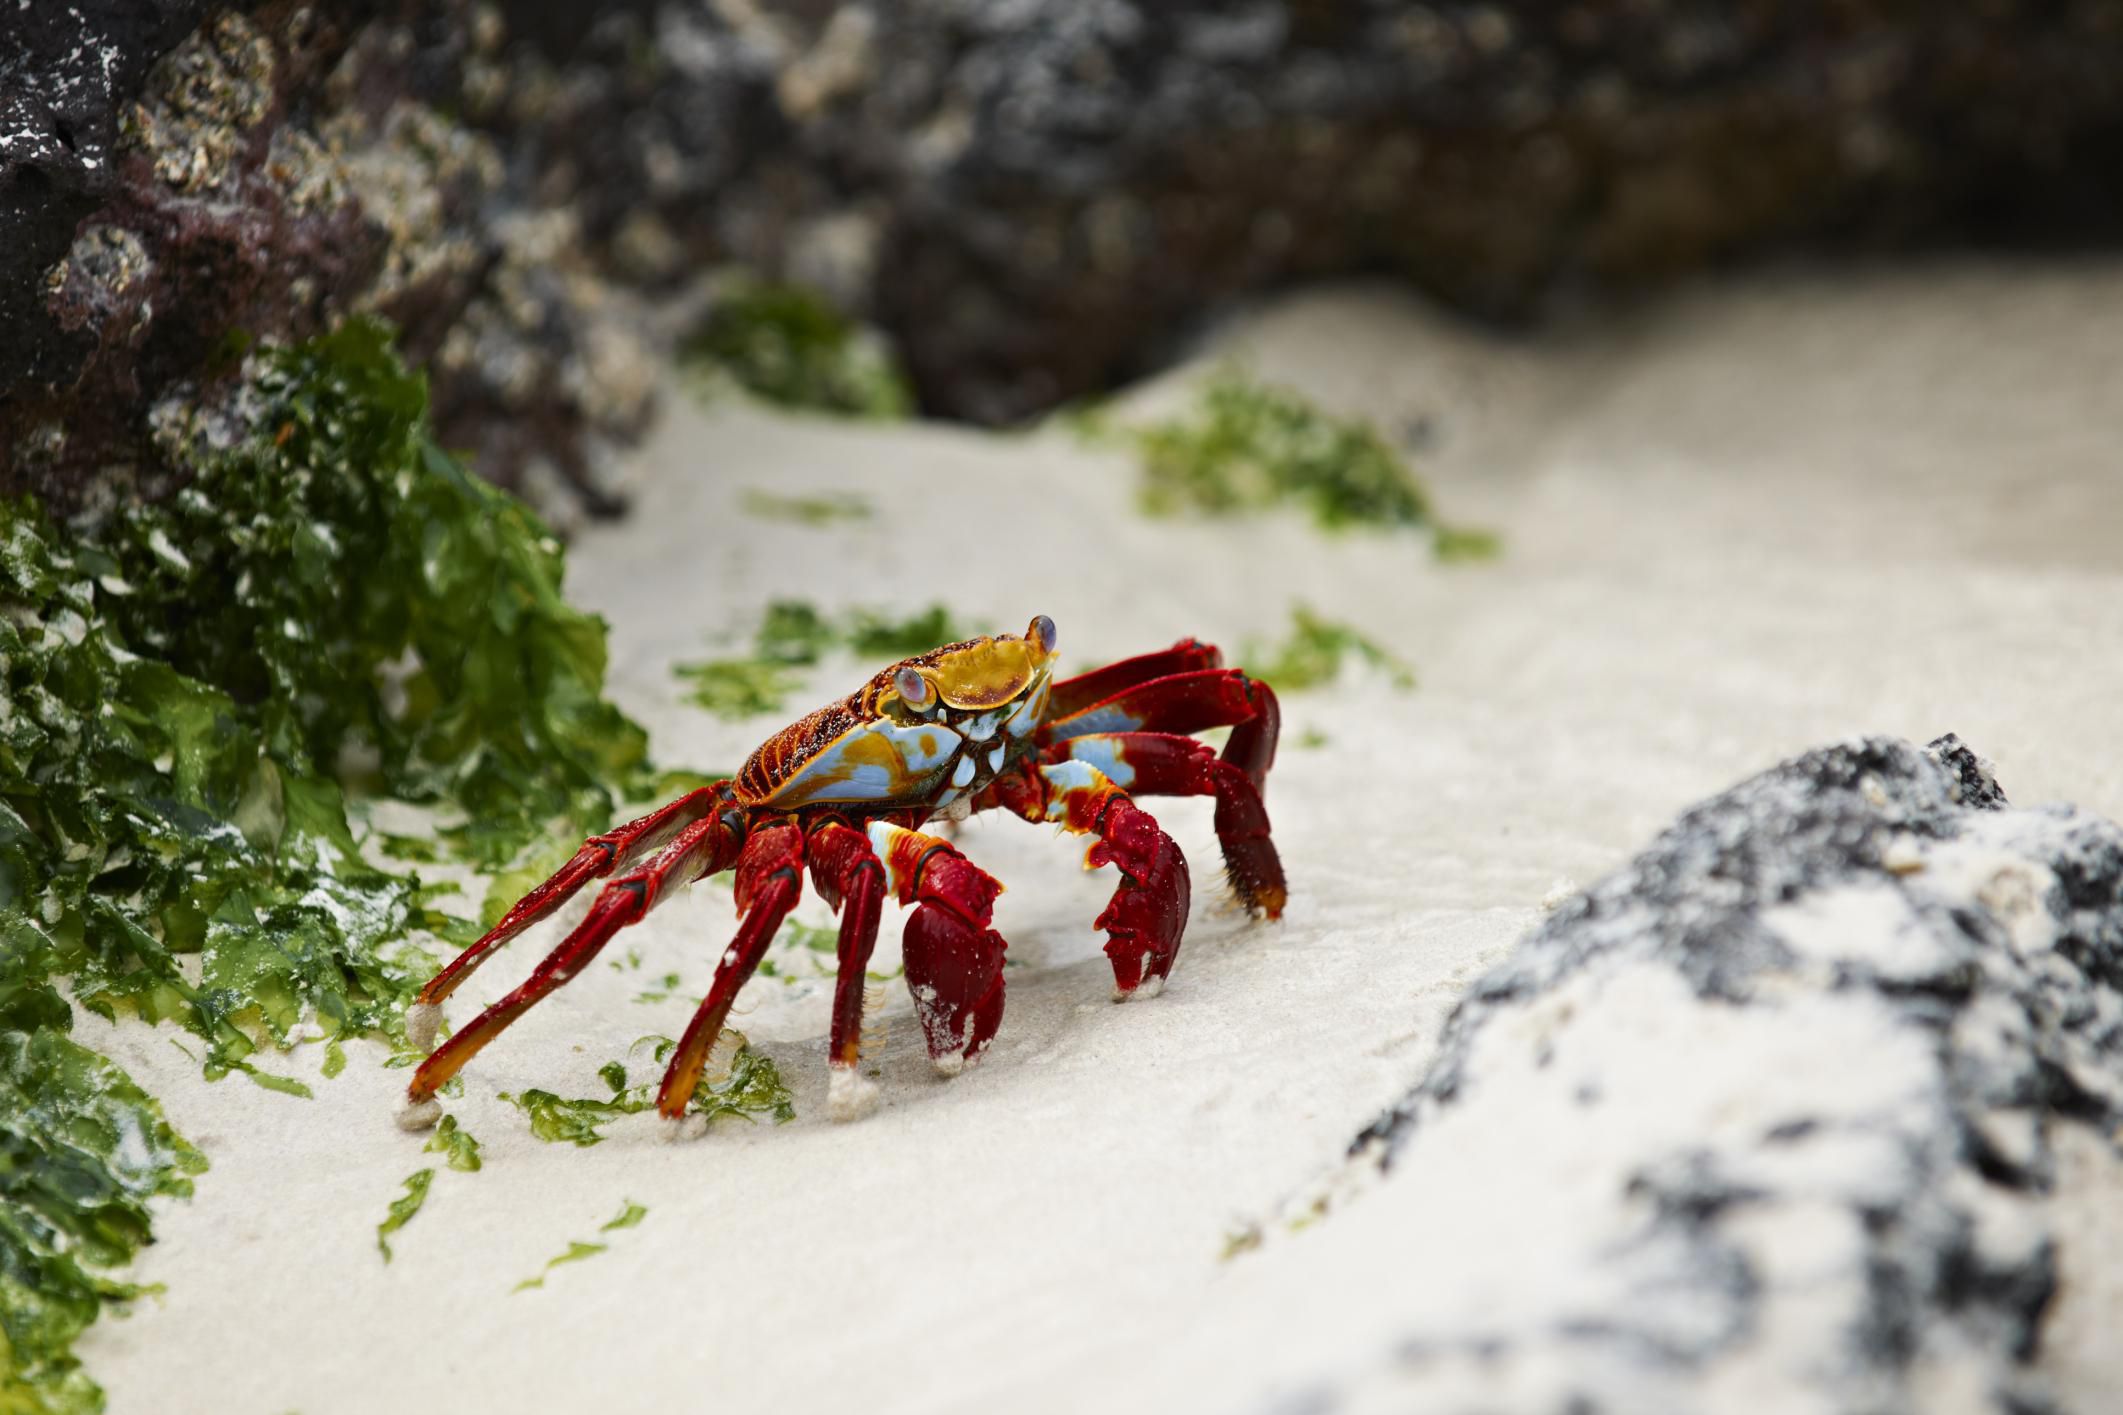 Crustacean Characteristics and Other Basic Facts